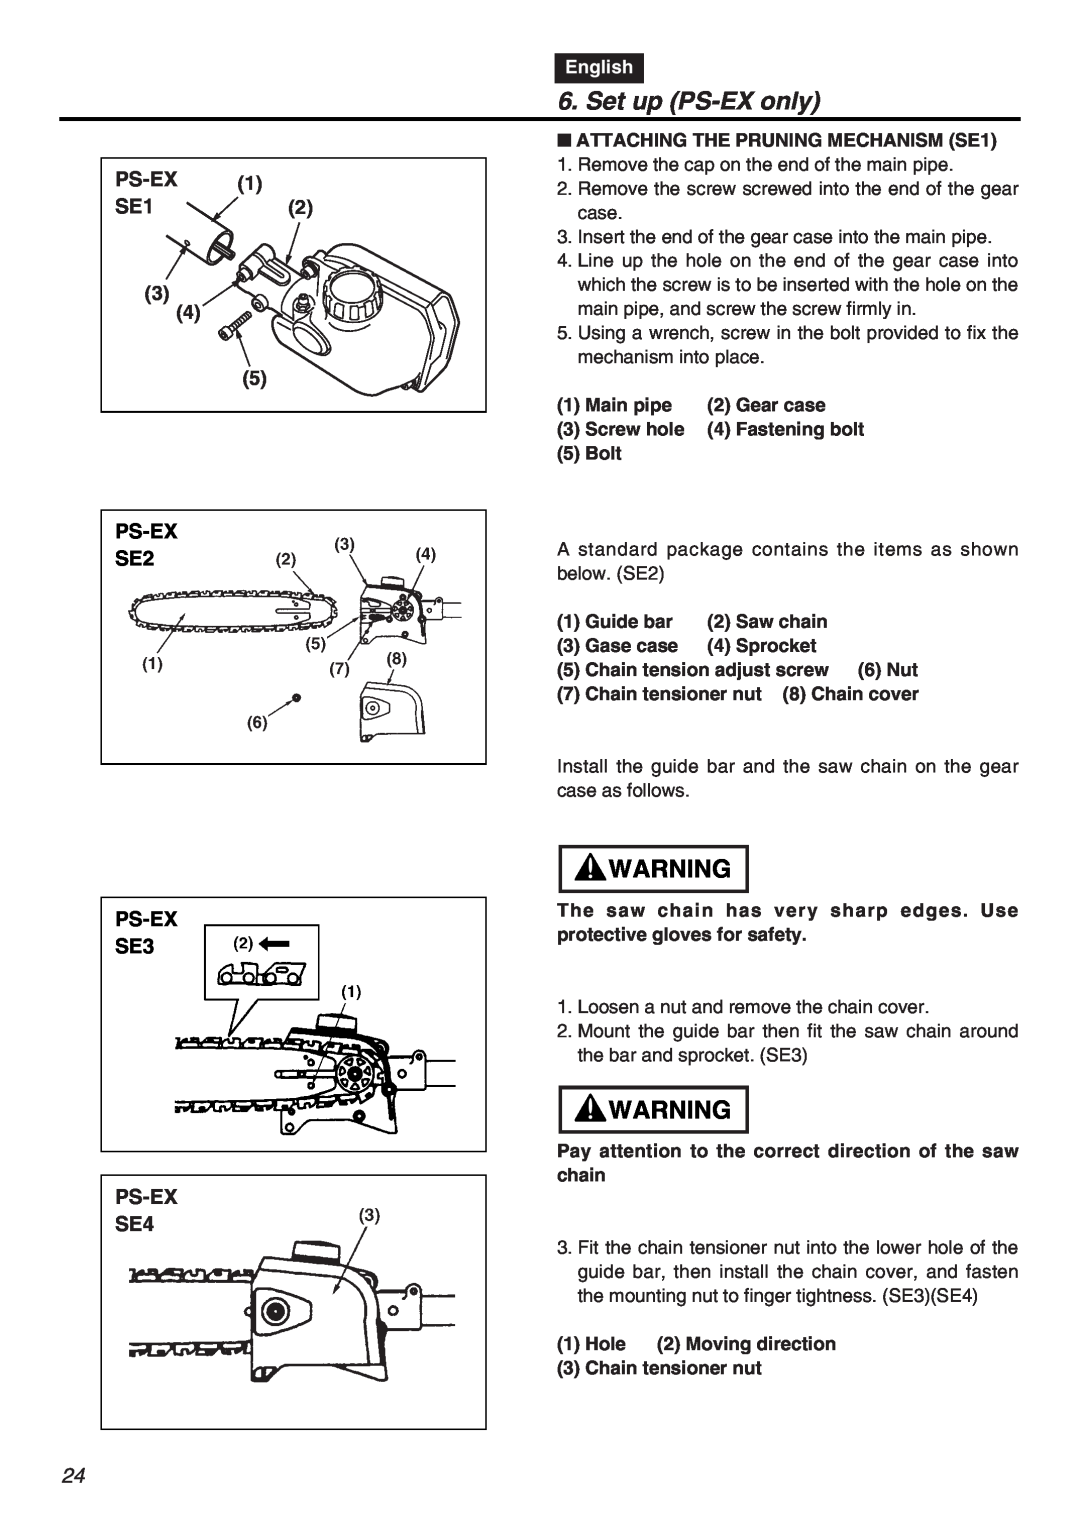 RedMax EXZ2401S-PH-CA manual Set up PS-EX only, Ps-Ex, PS-EX SE2, PS-EX SE3 PS-EX SE4, English 